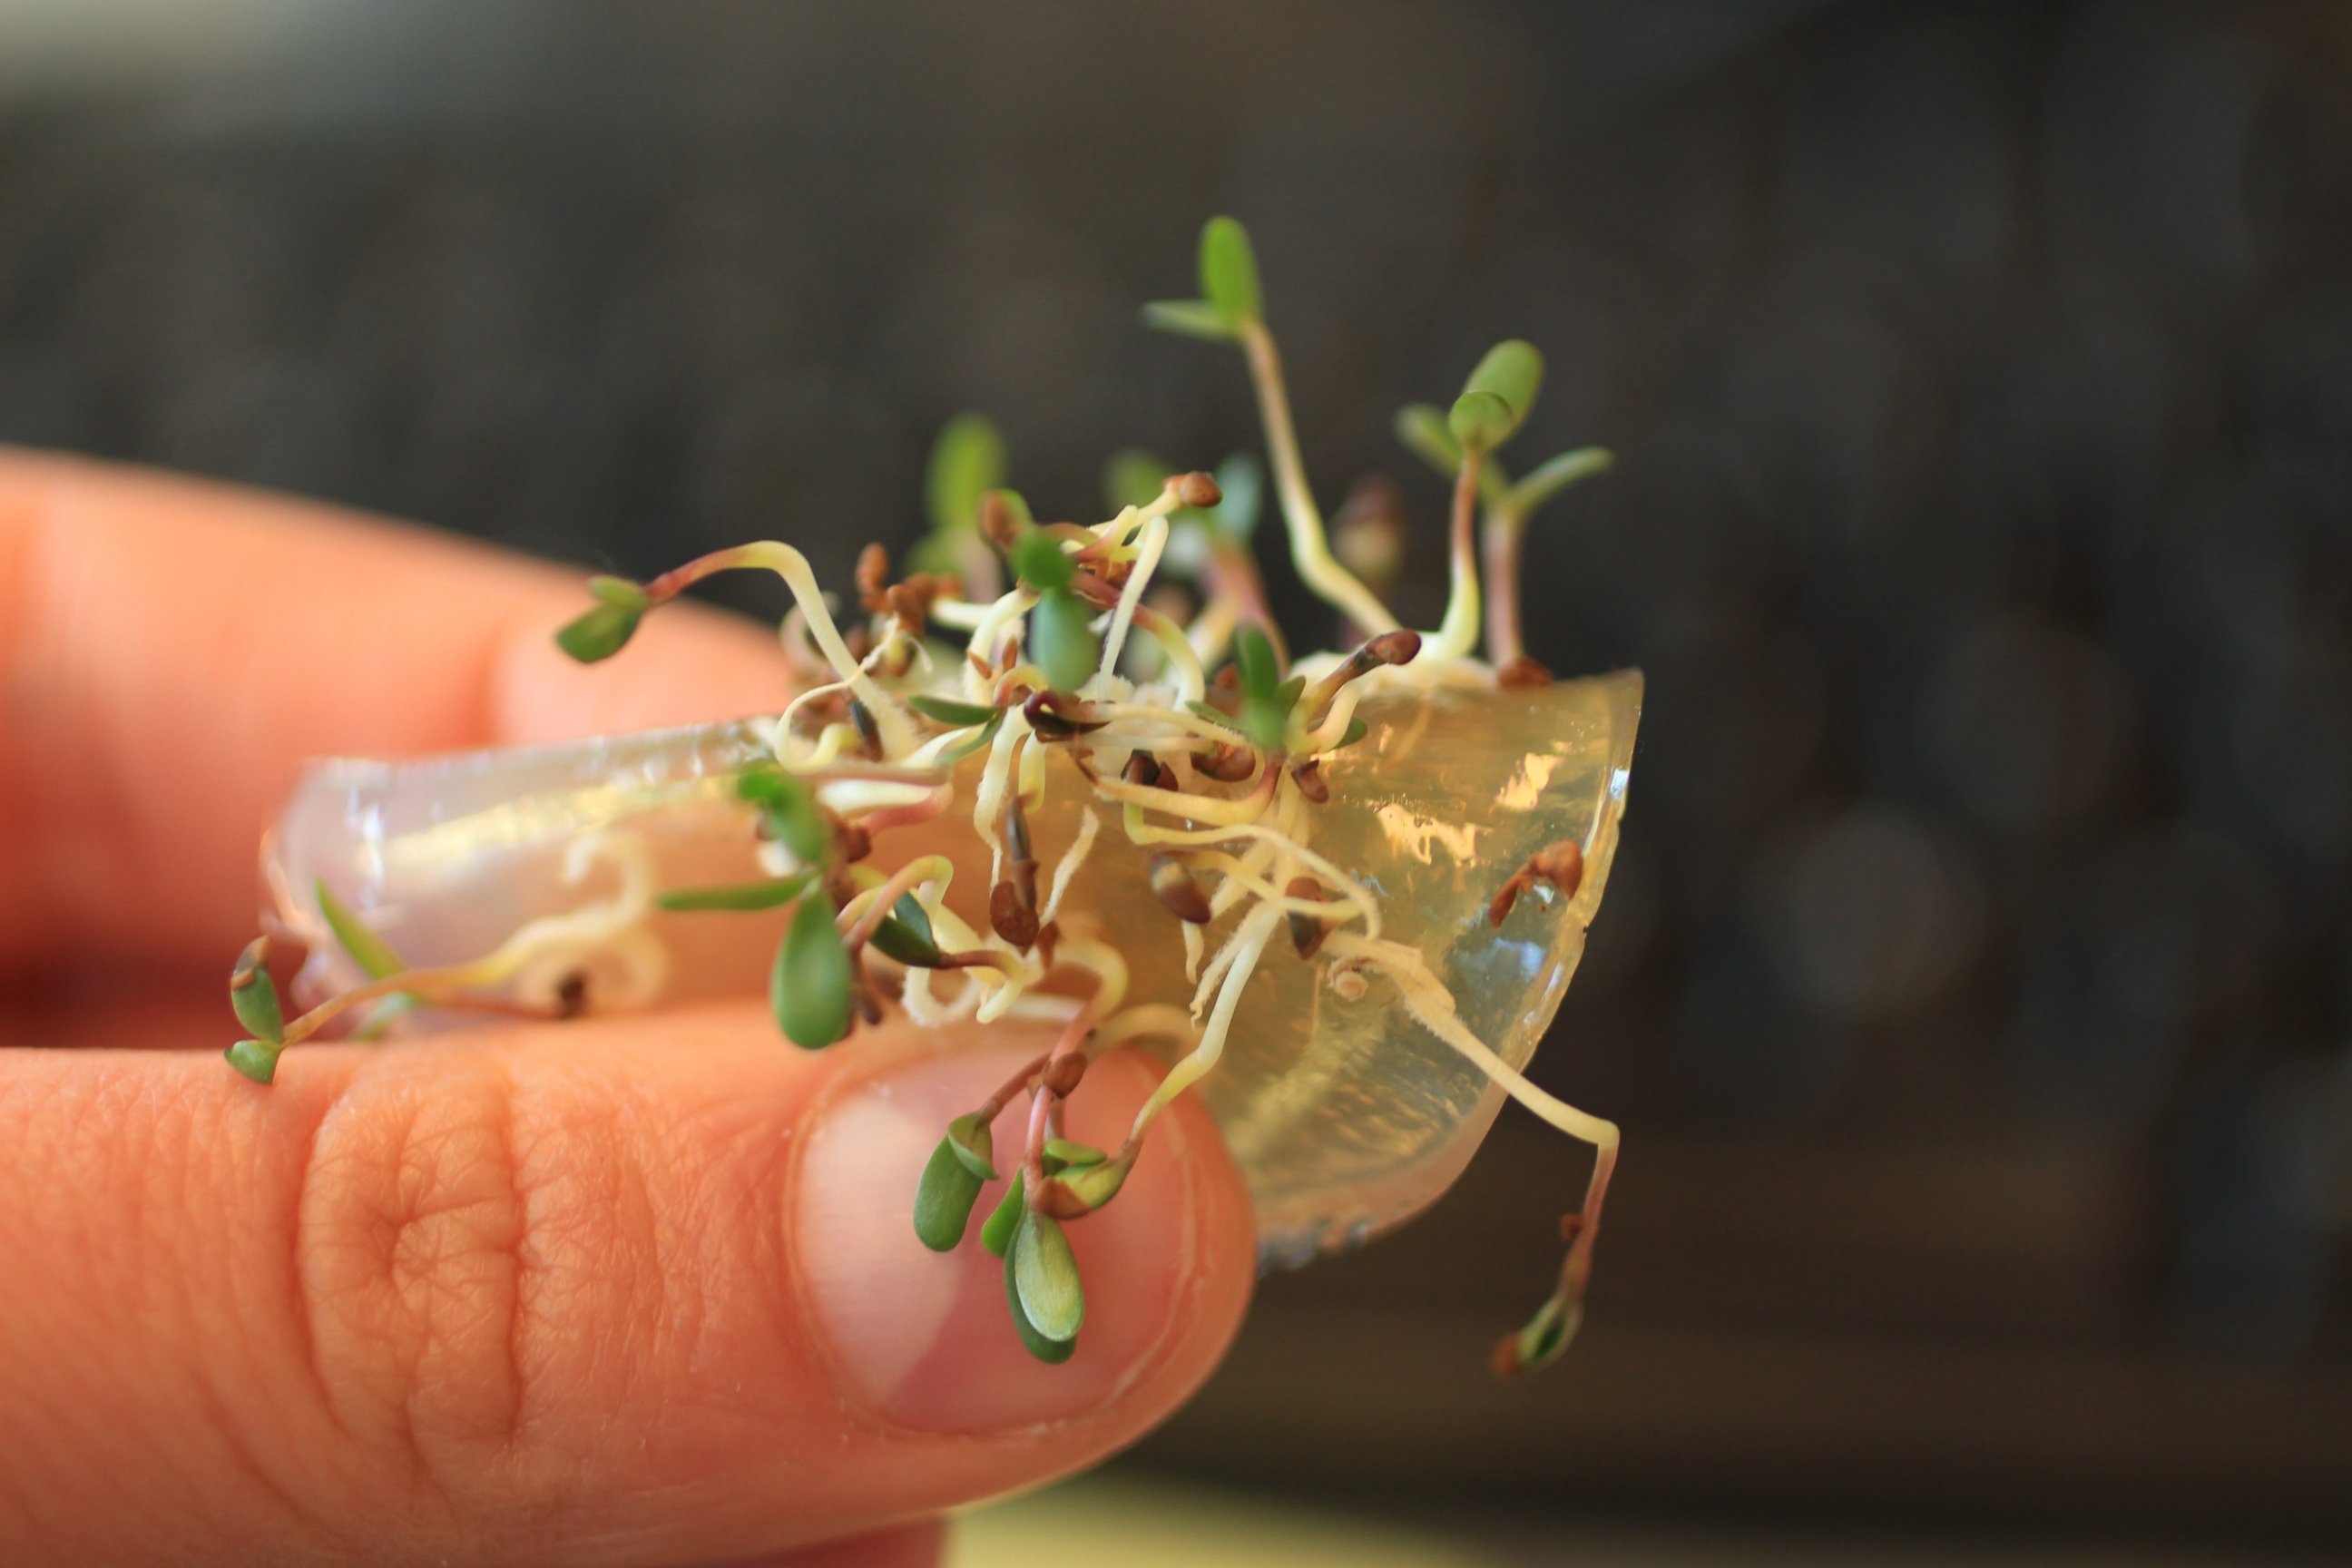 PHOTO: The Edible Growth project combines nature, science, technology and design.
